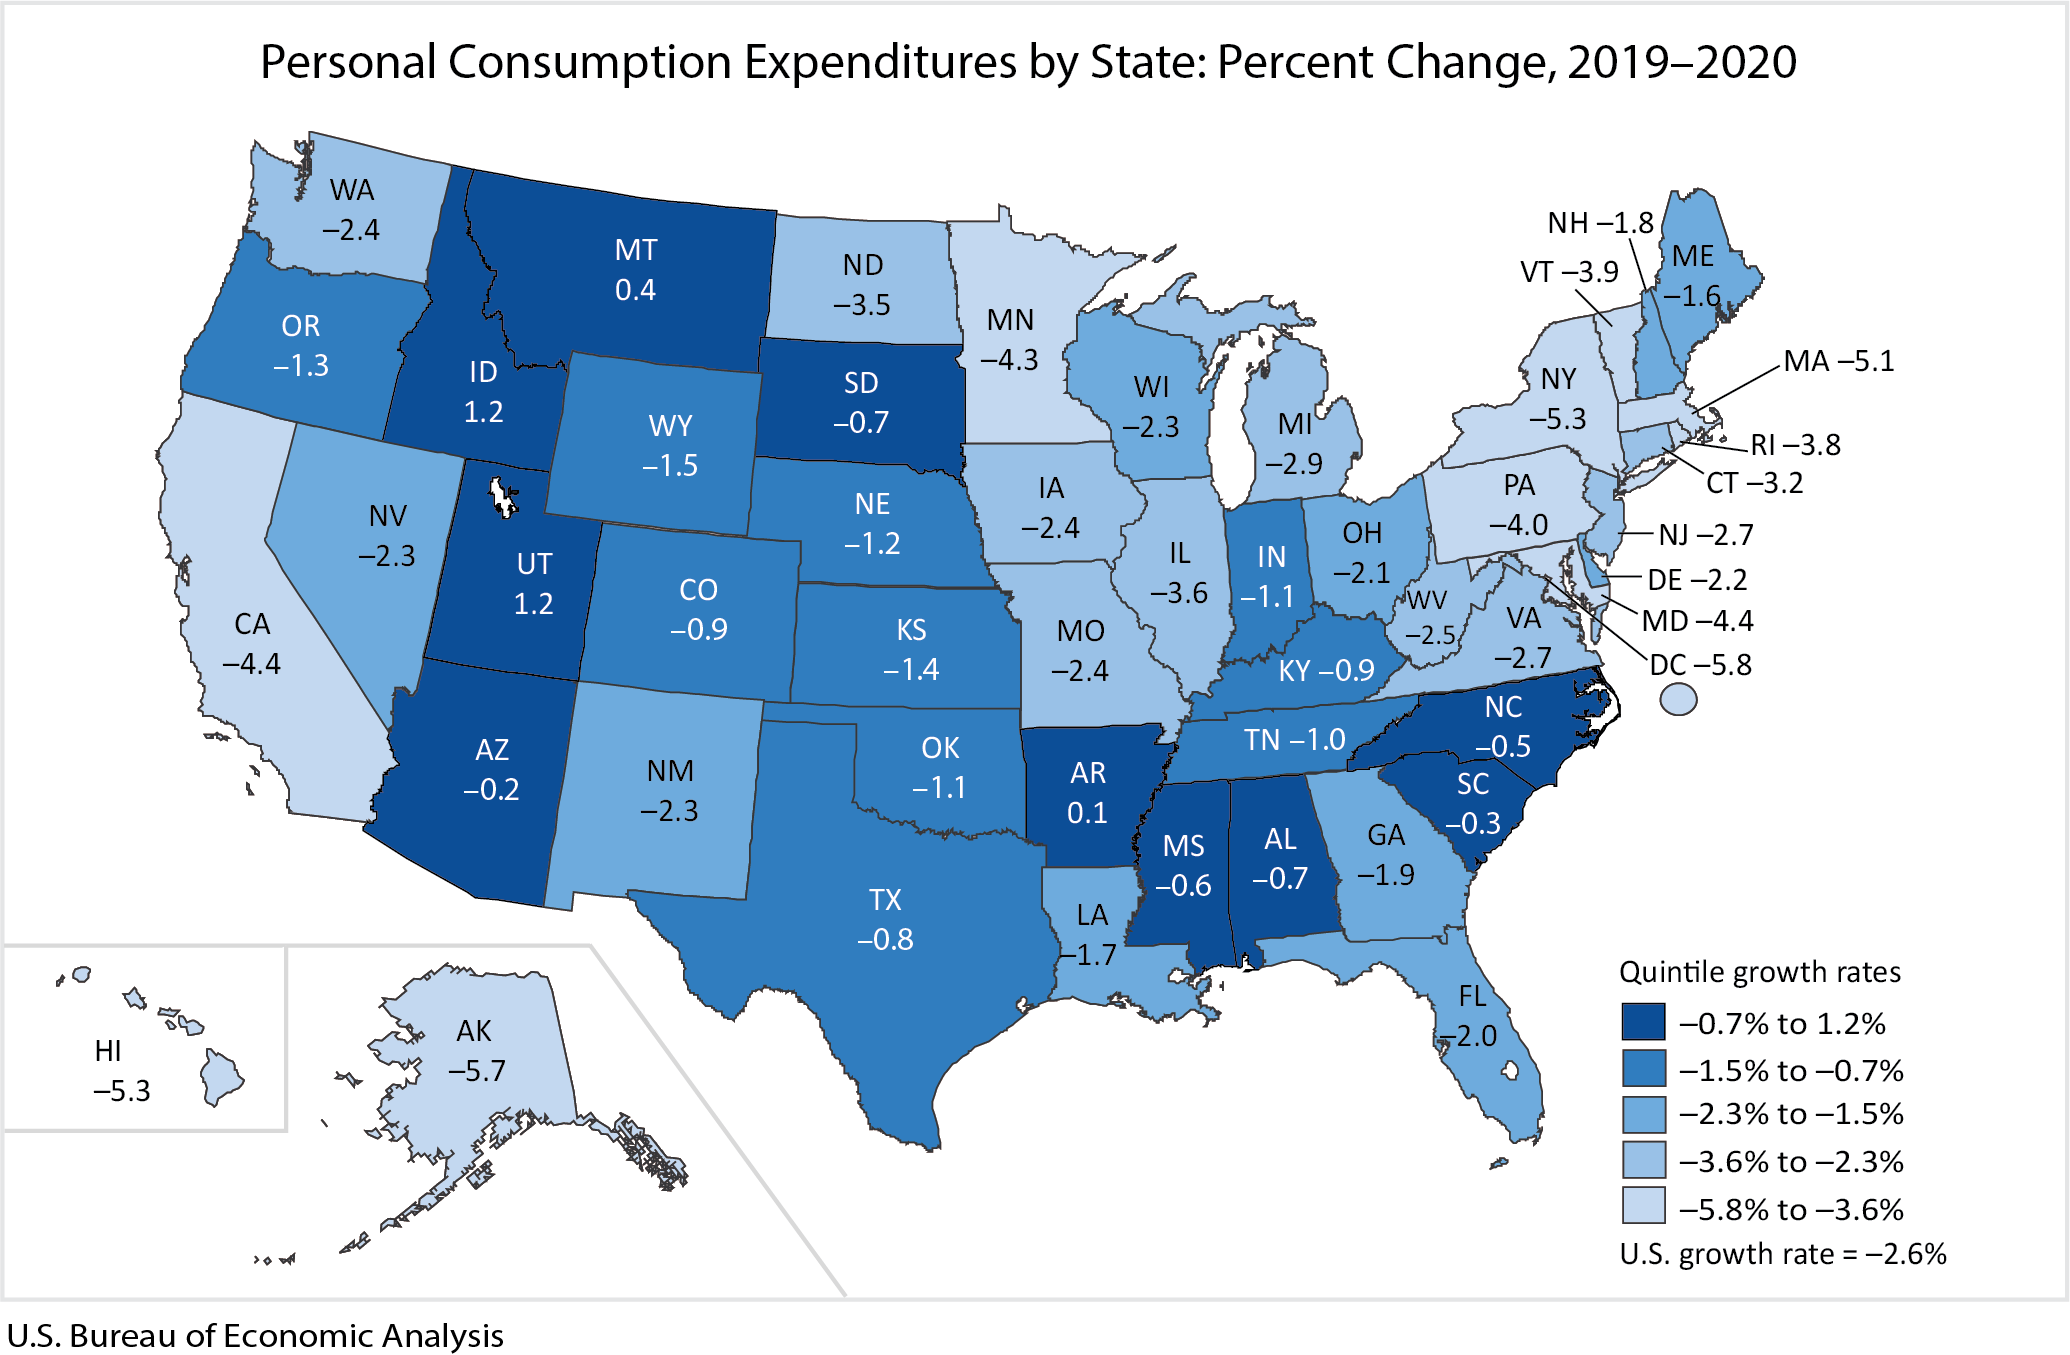 State consumer spending, percent change from 2019 to 2020